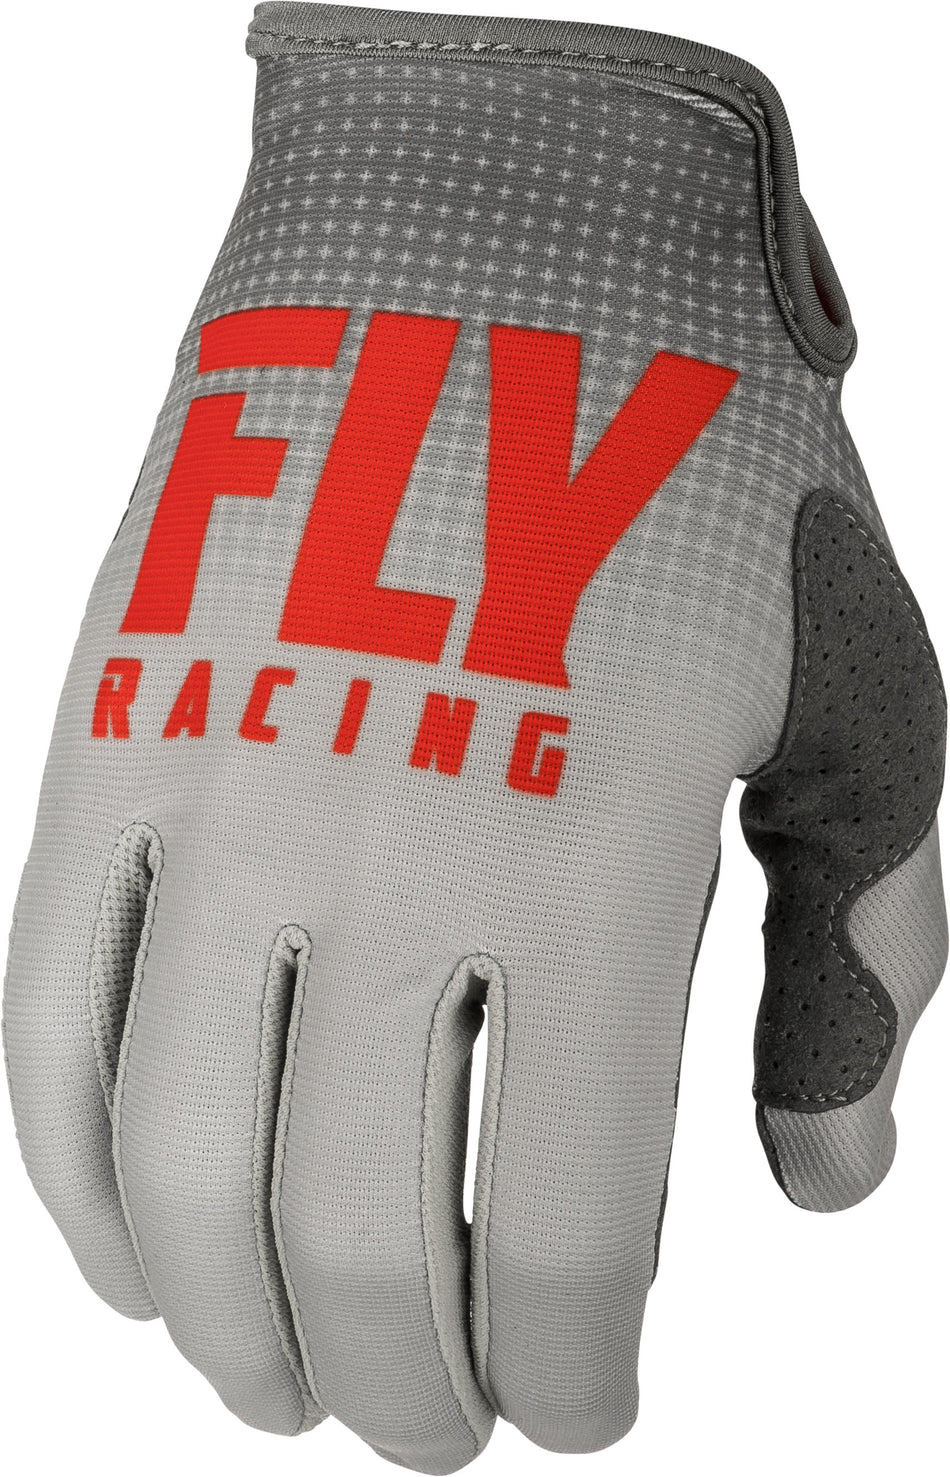 FLY RACING Lite Gloves Red/Grey Sz 09 372-01209